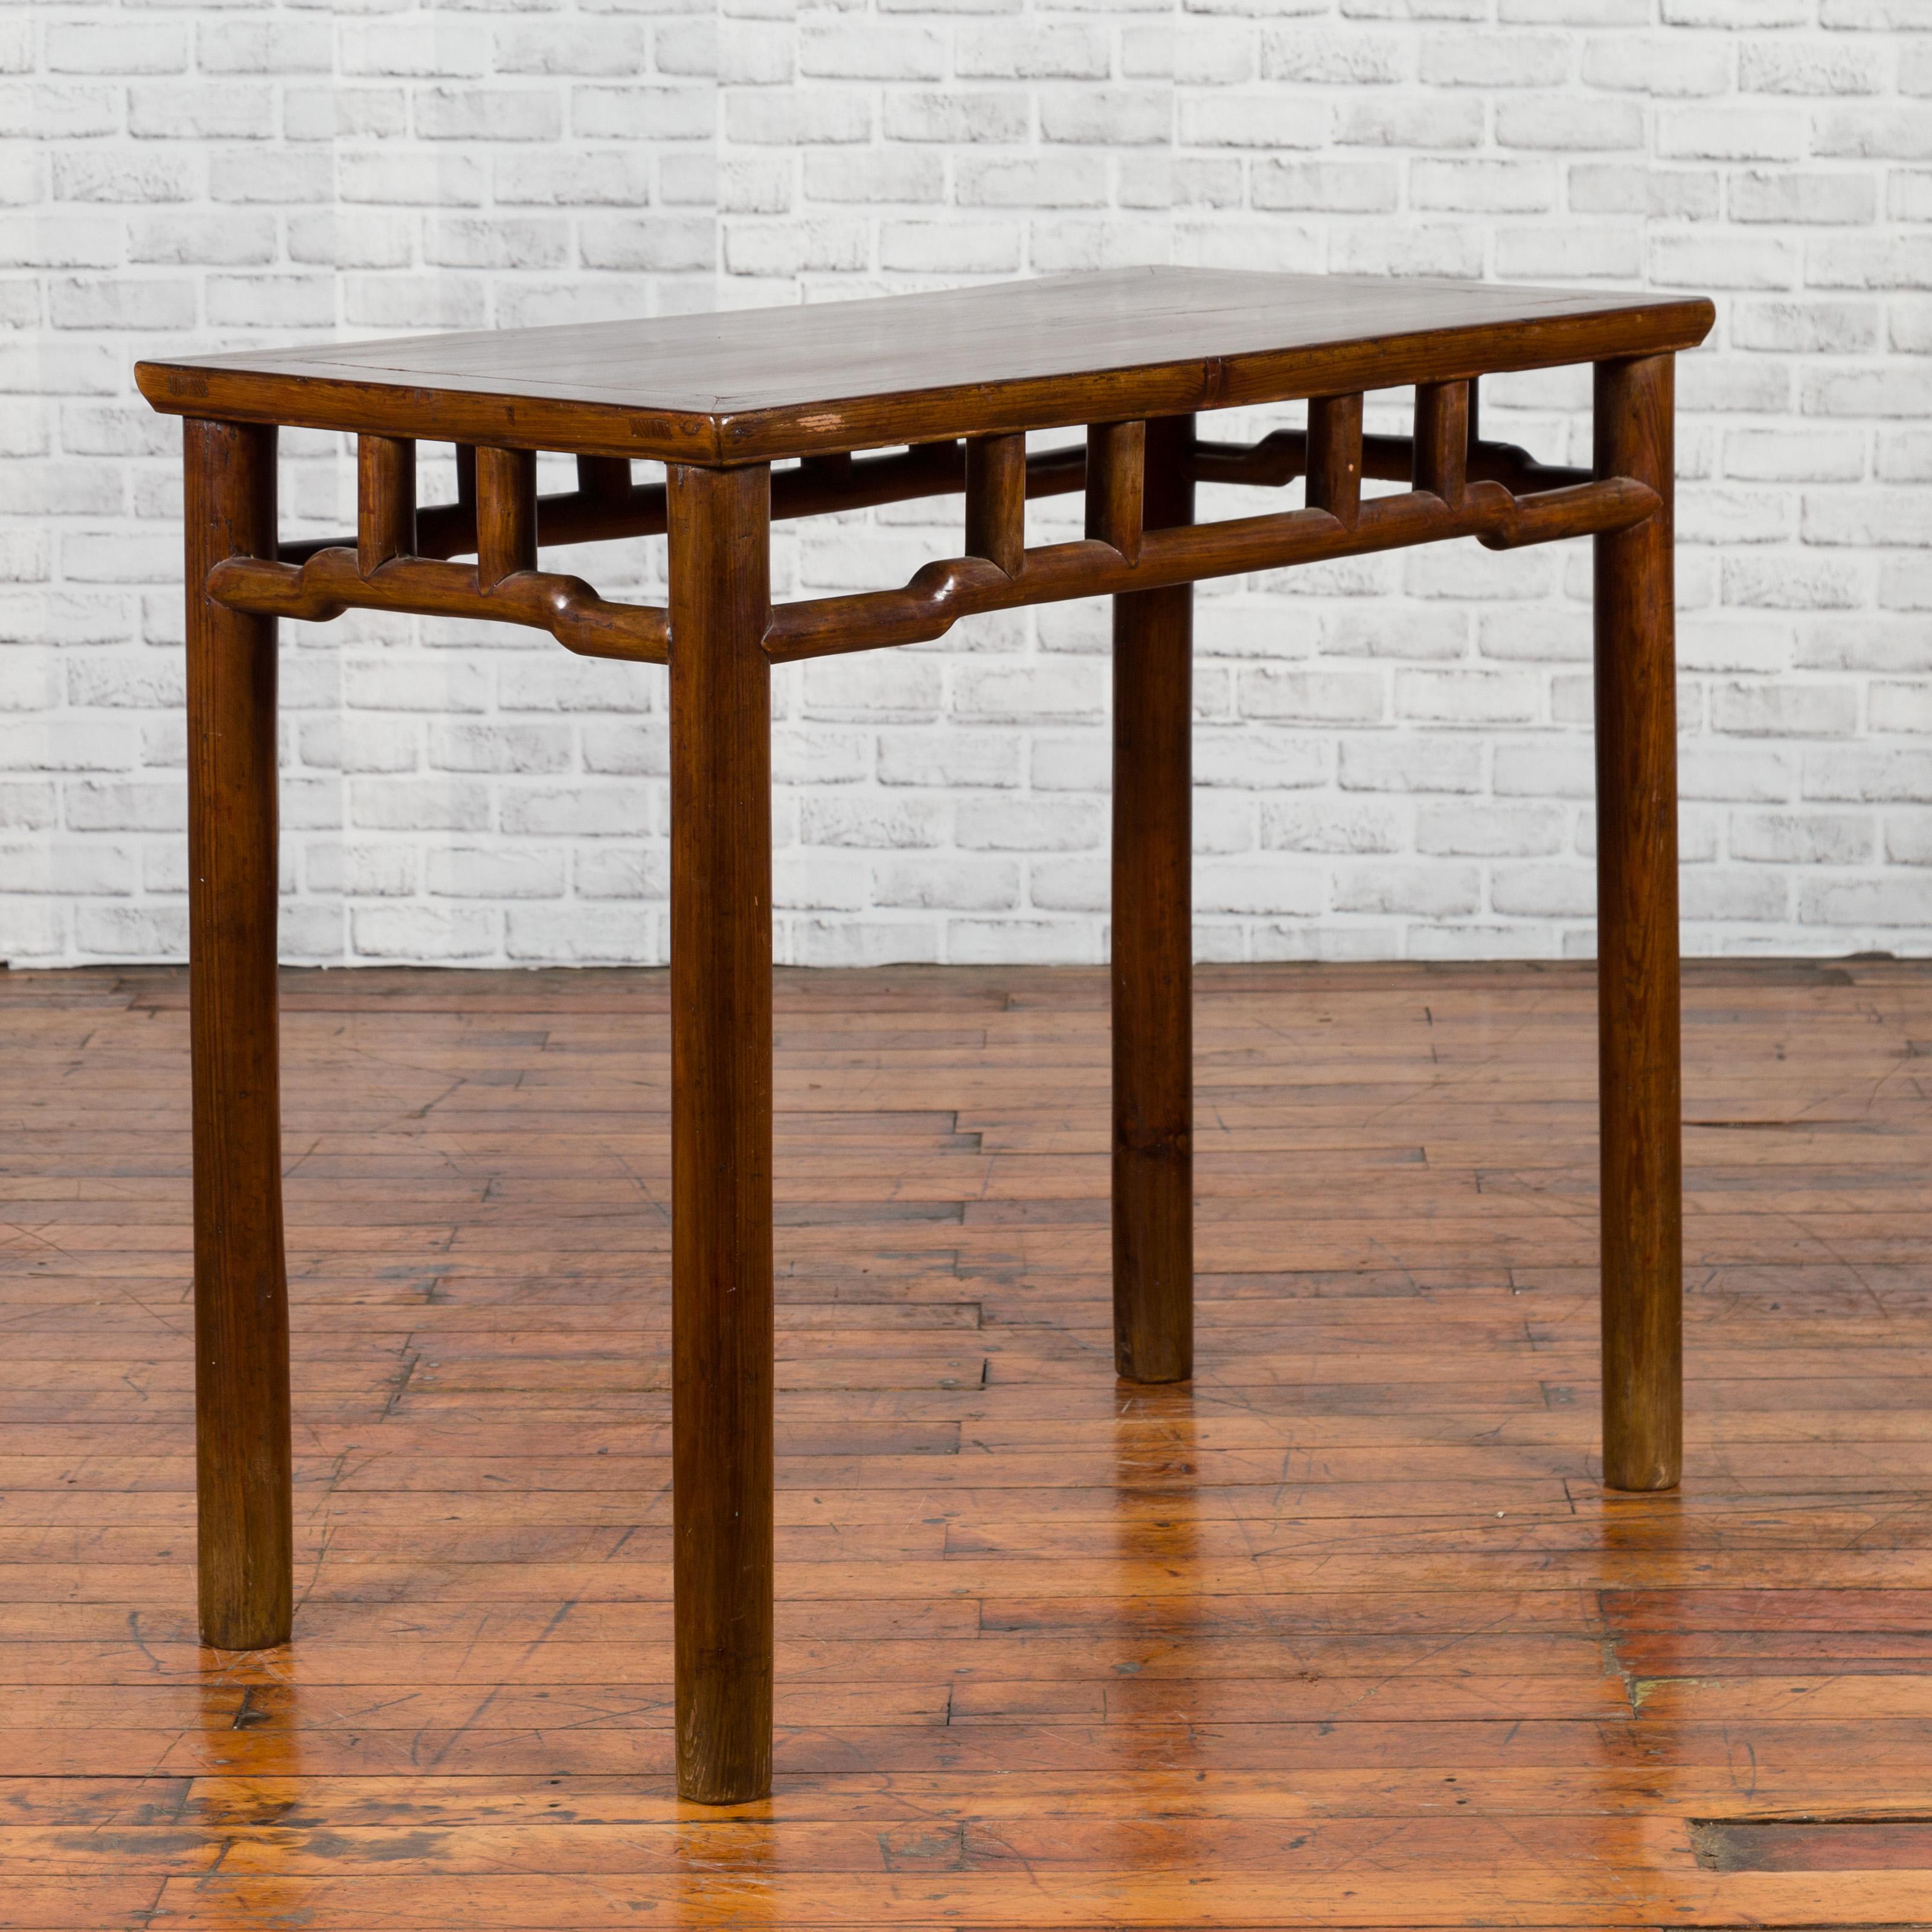 19th Century Chinese Qing Dynasty Elm Console Table with Pillar Struts and Humpbacked Apron